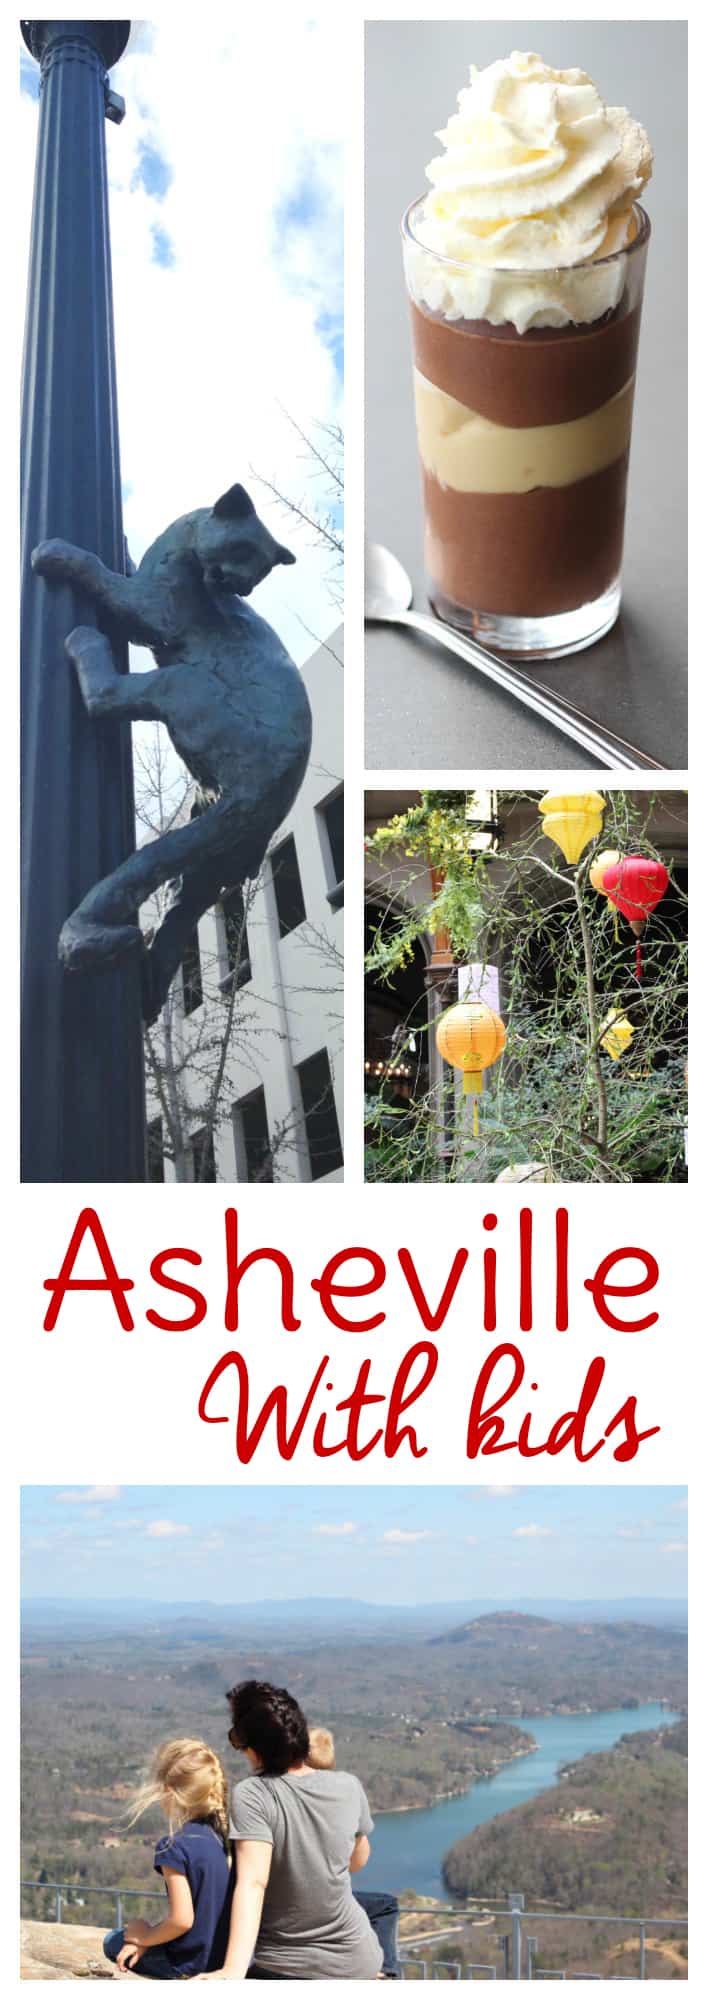 Hesitant to do Asheville with kids? We found kid friendly Asheville a great experience! Keep reading for some dining and activity ideas in Asheville for Families.